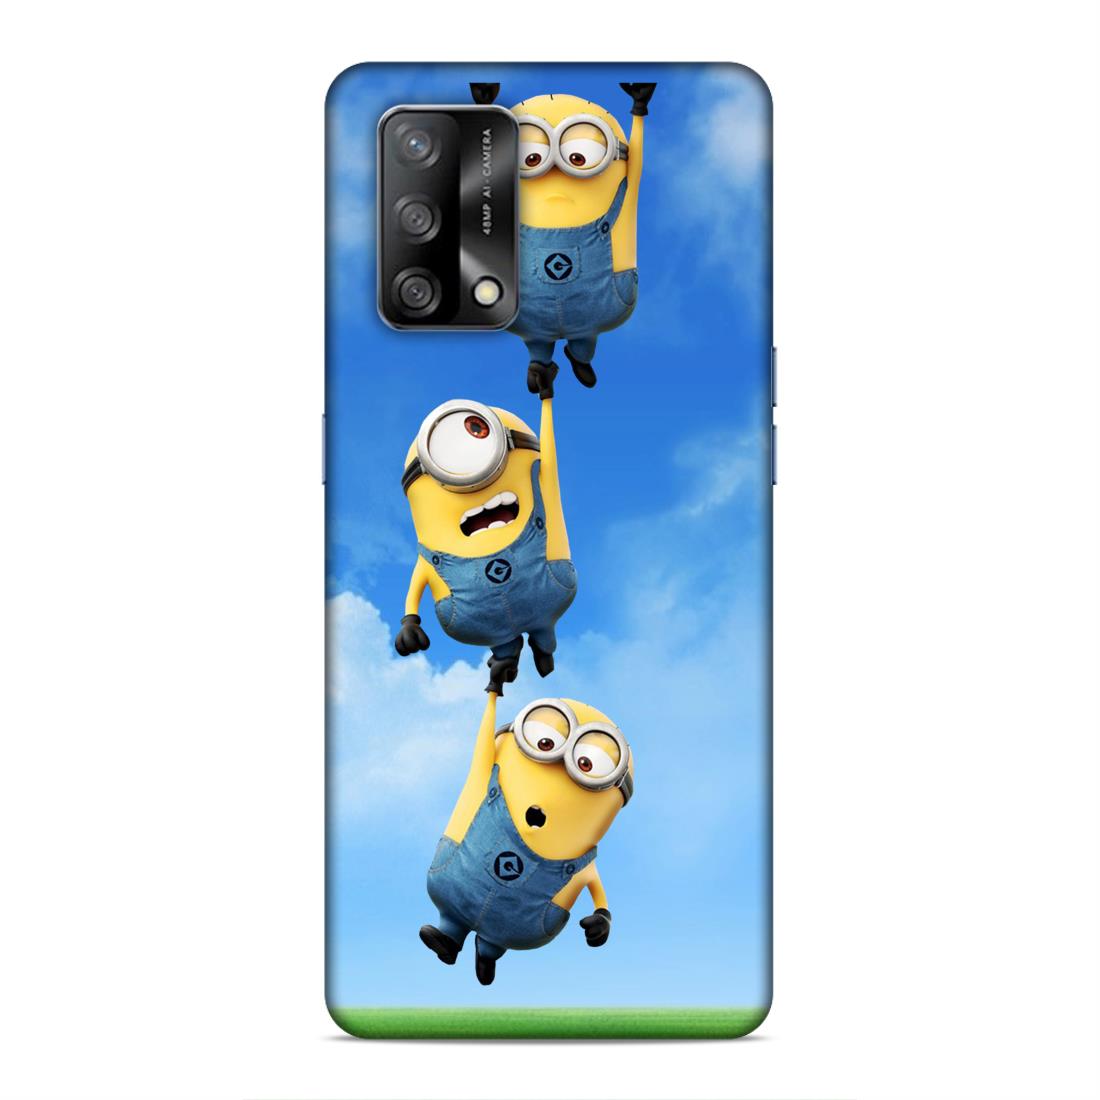 Minions Hard Back Case For Oppo F19 / F19s